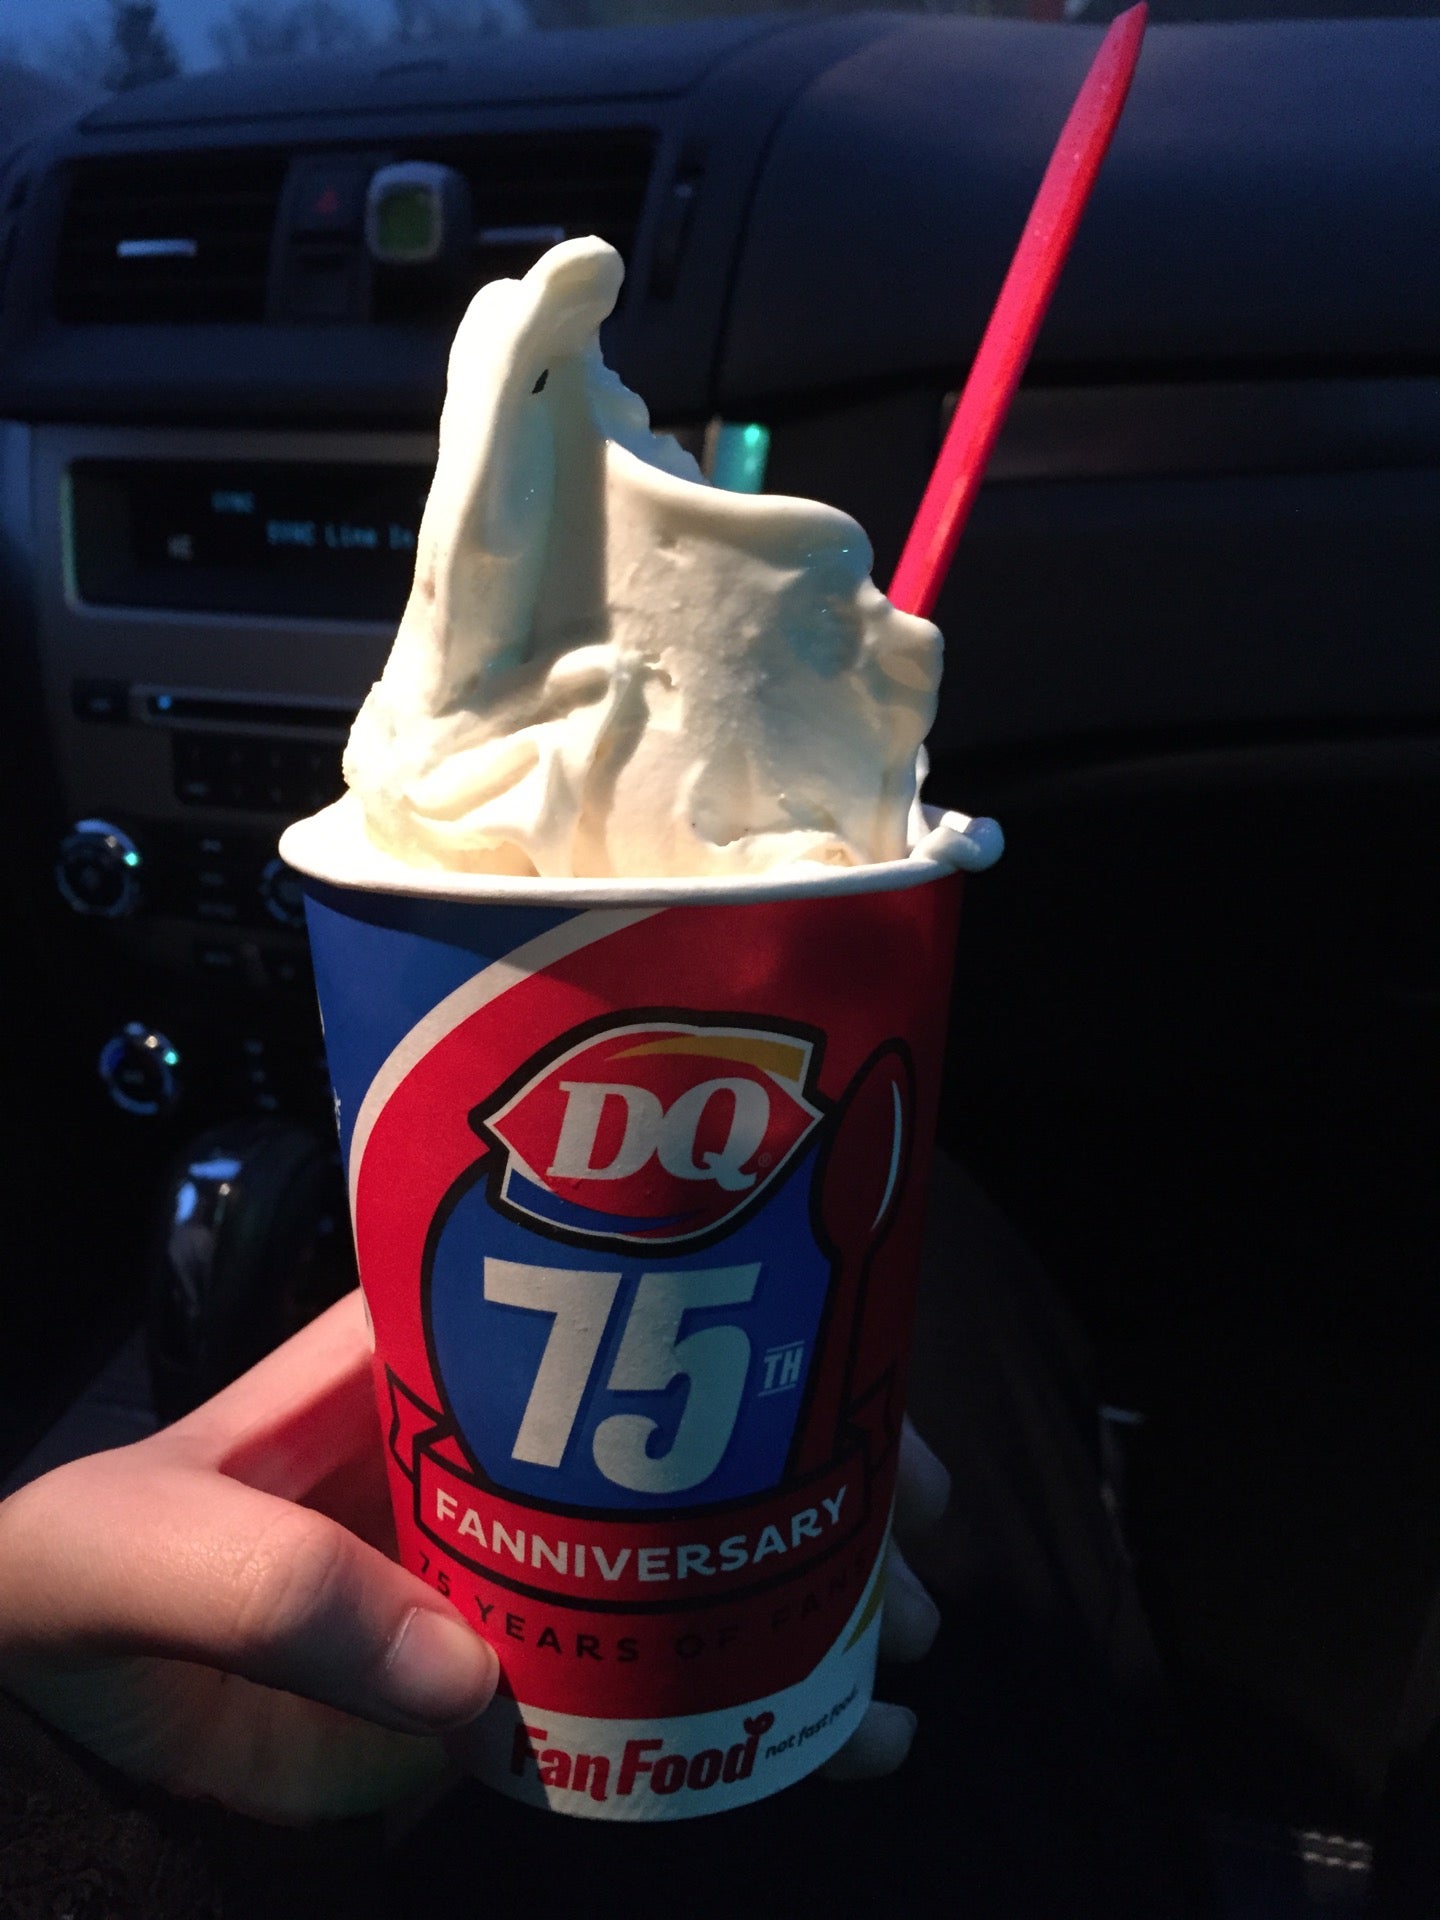 DQ Treat Only in Vernon, NJ, 260 State Rt 94